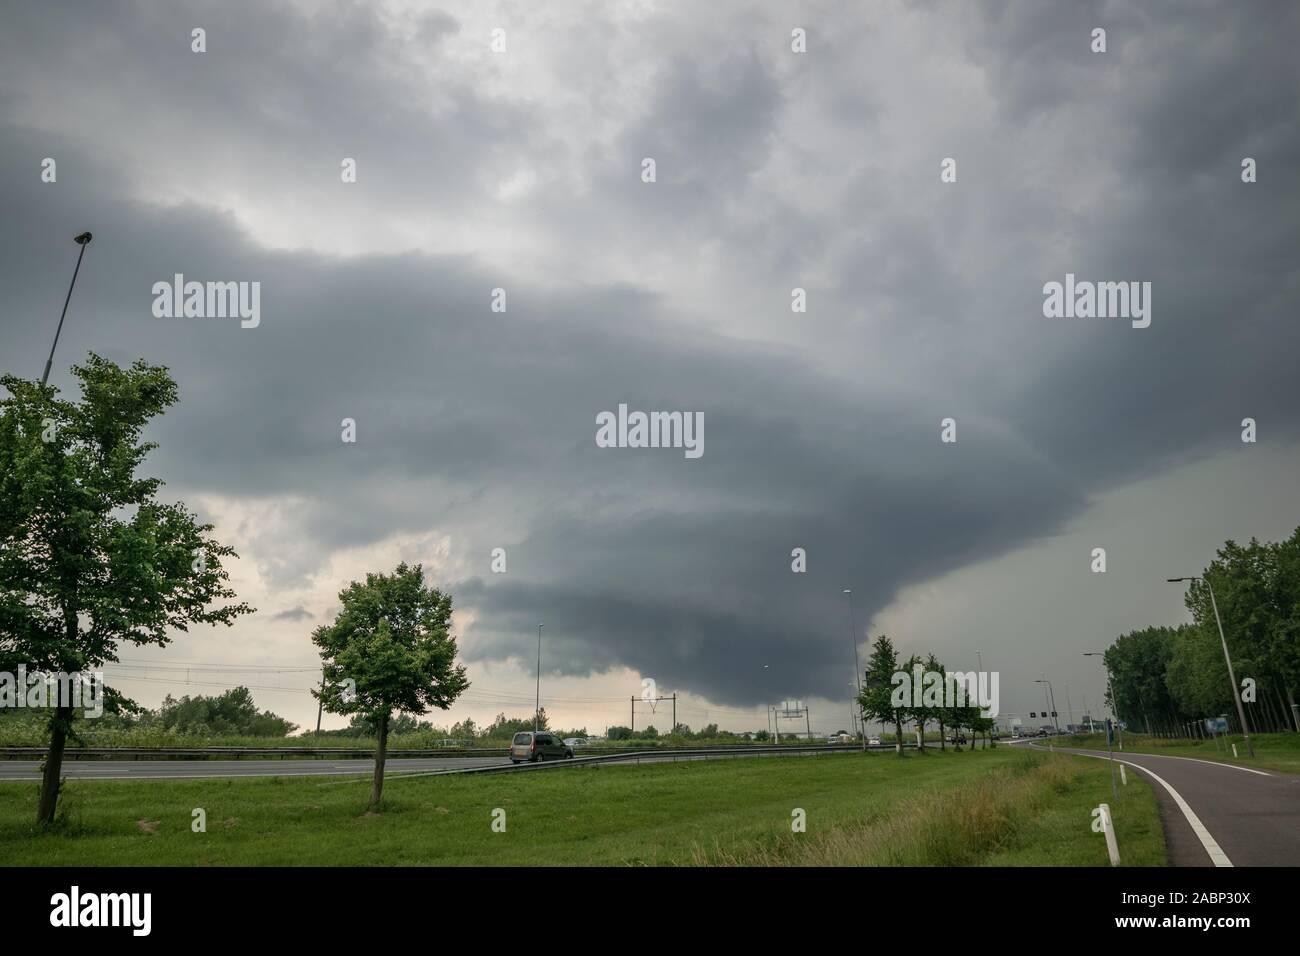 Rotating wallcloud of a supercell thunderstorm over the highway. Torrential rain and large hail were caused by this storm. Stock Photo